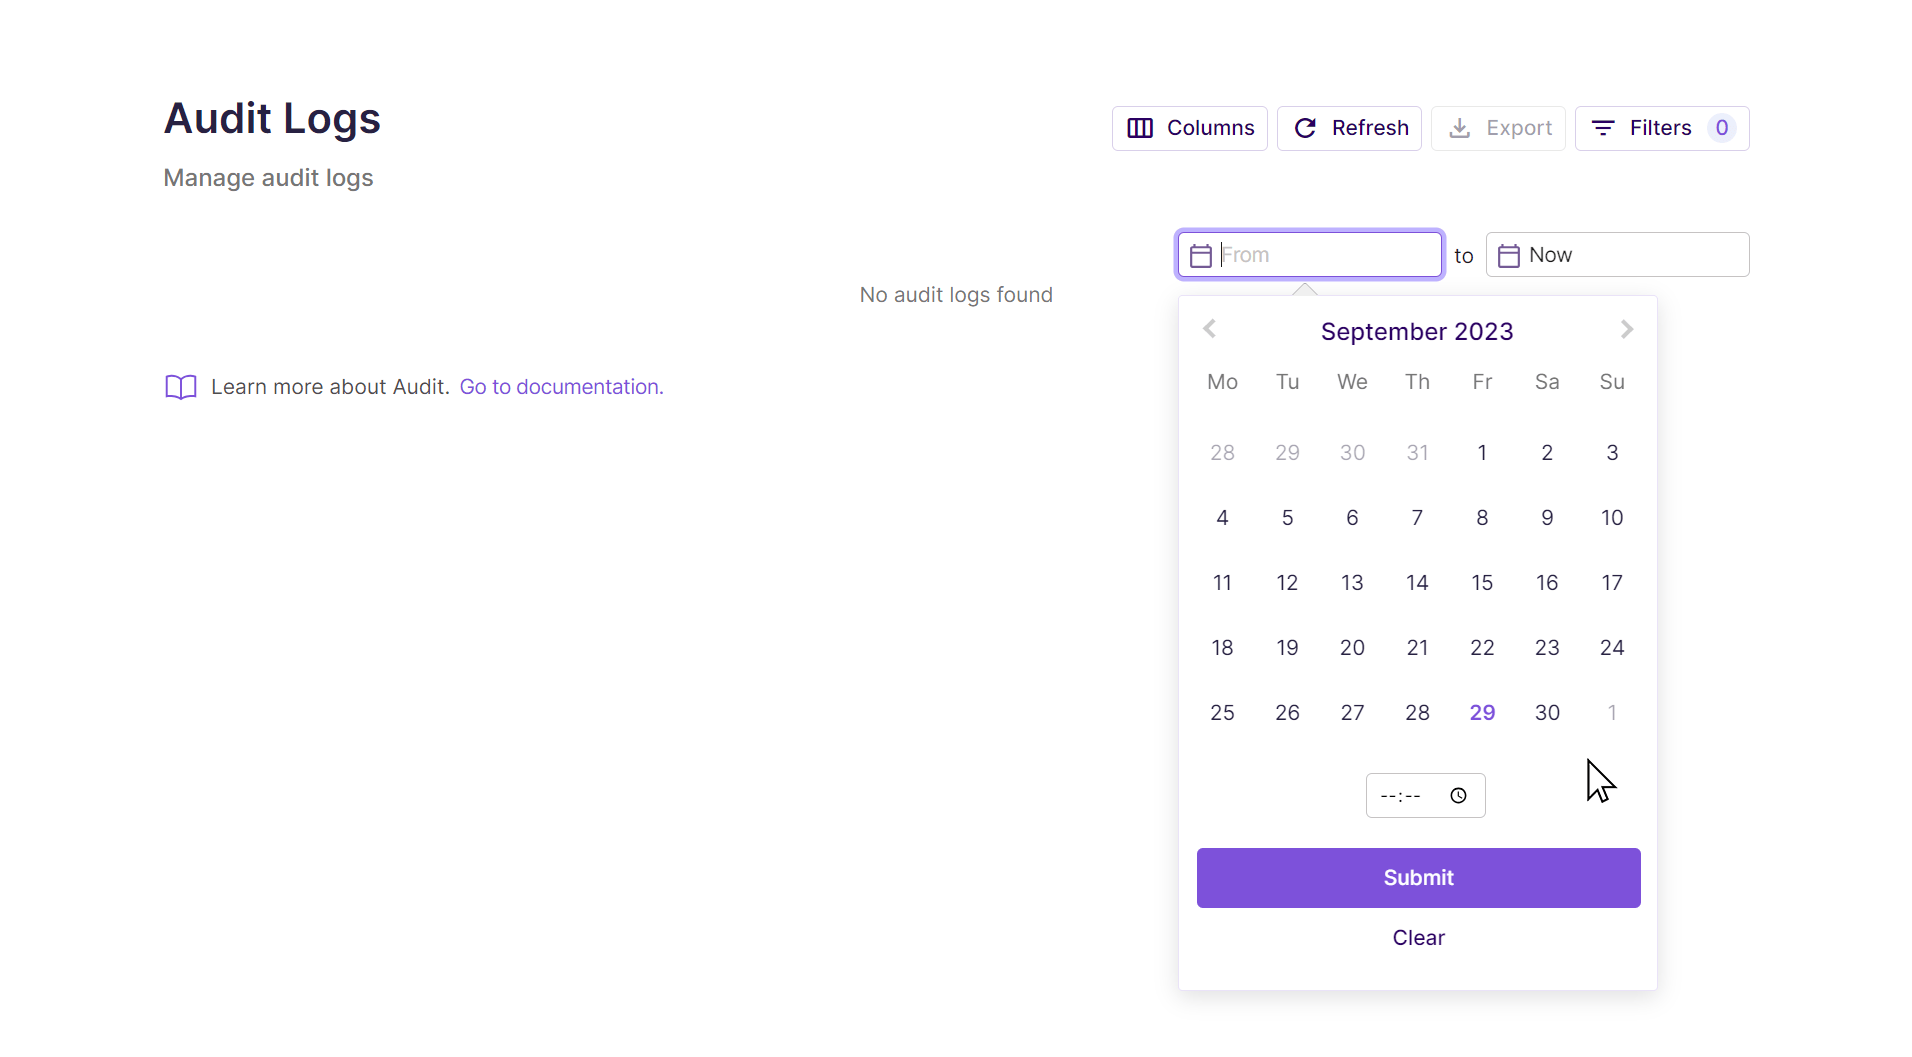 Completing the date filter type